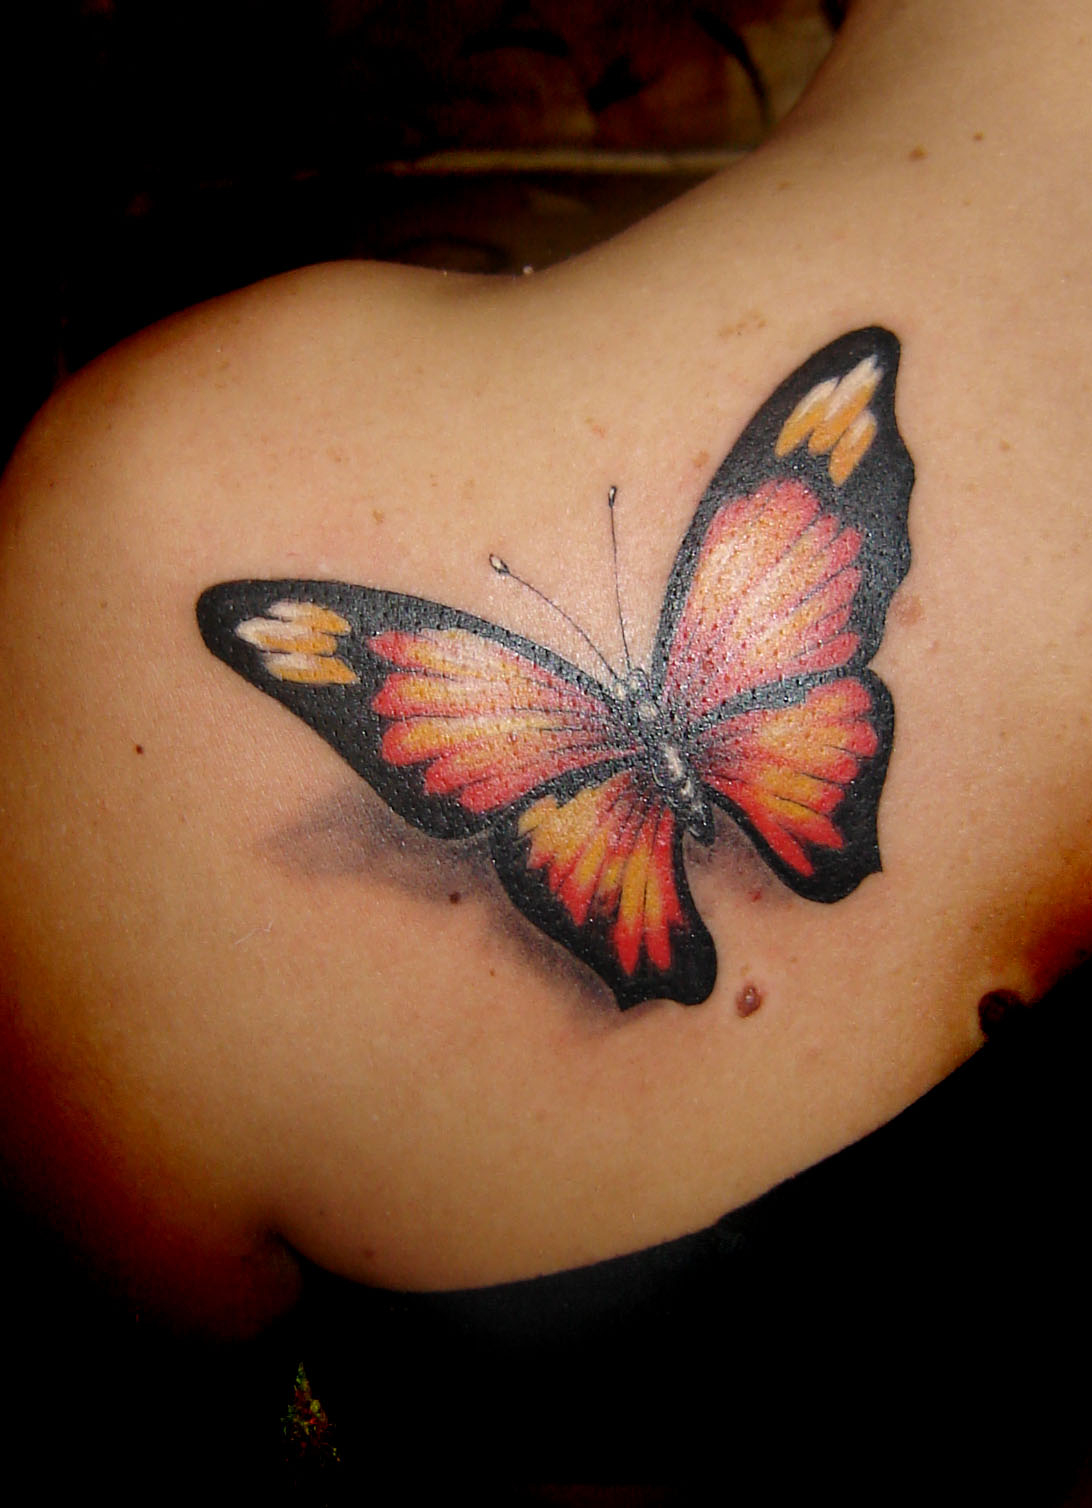 Tattoo Design Ideas Butterfly Tattoos within size 1092 X 1508